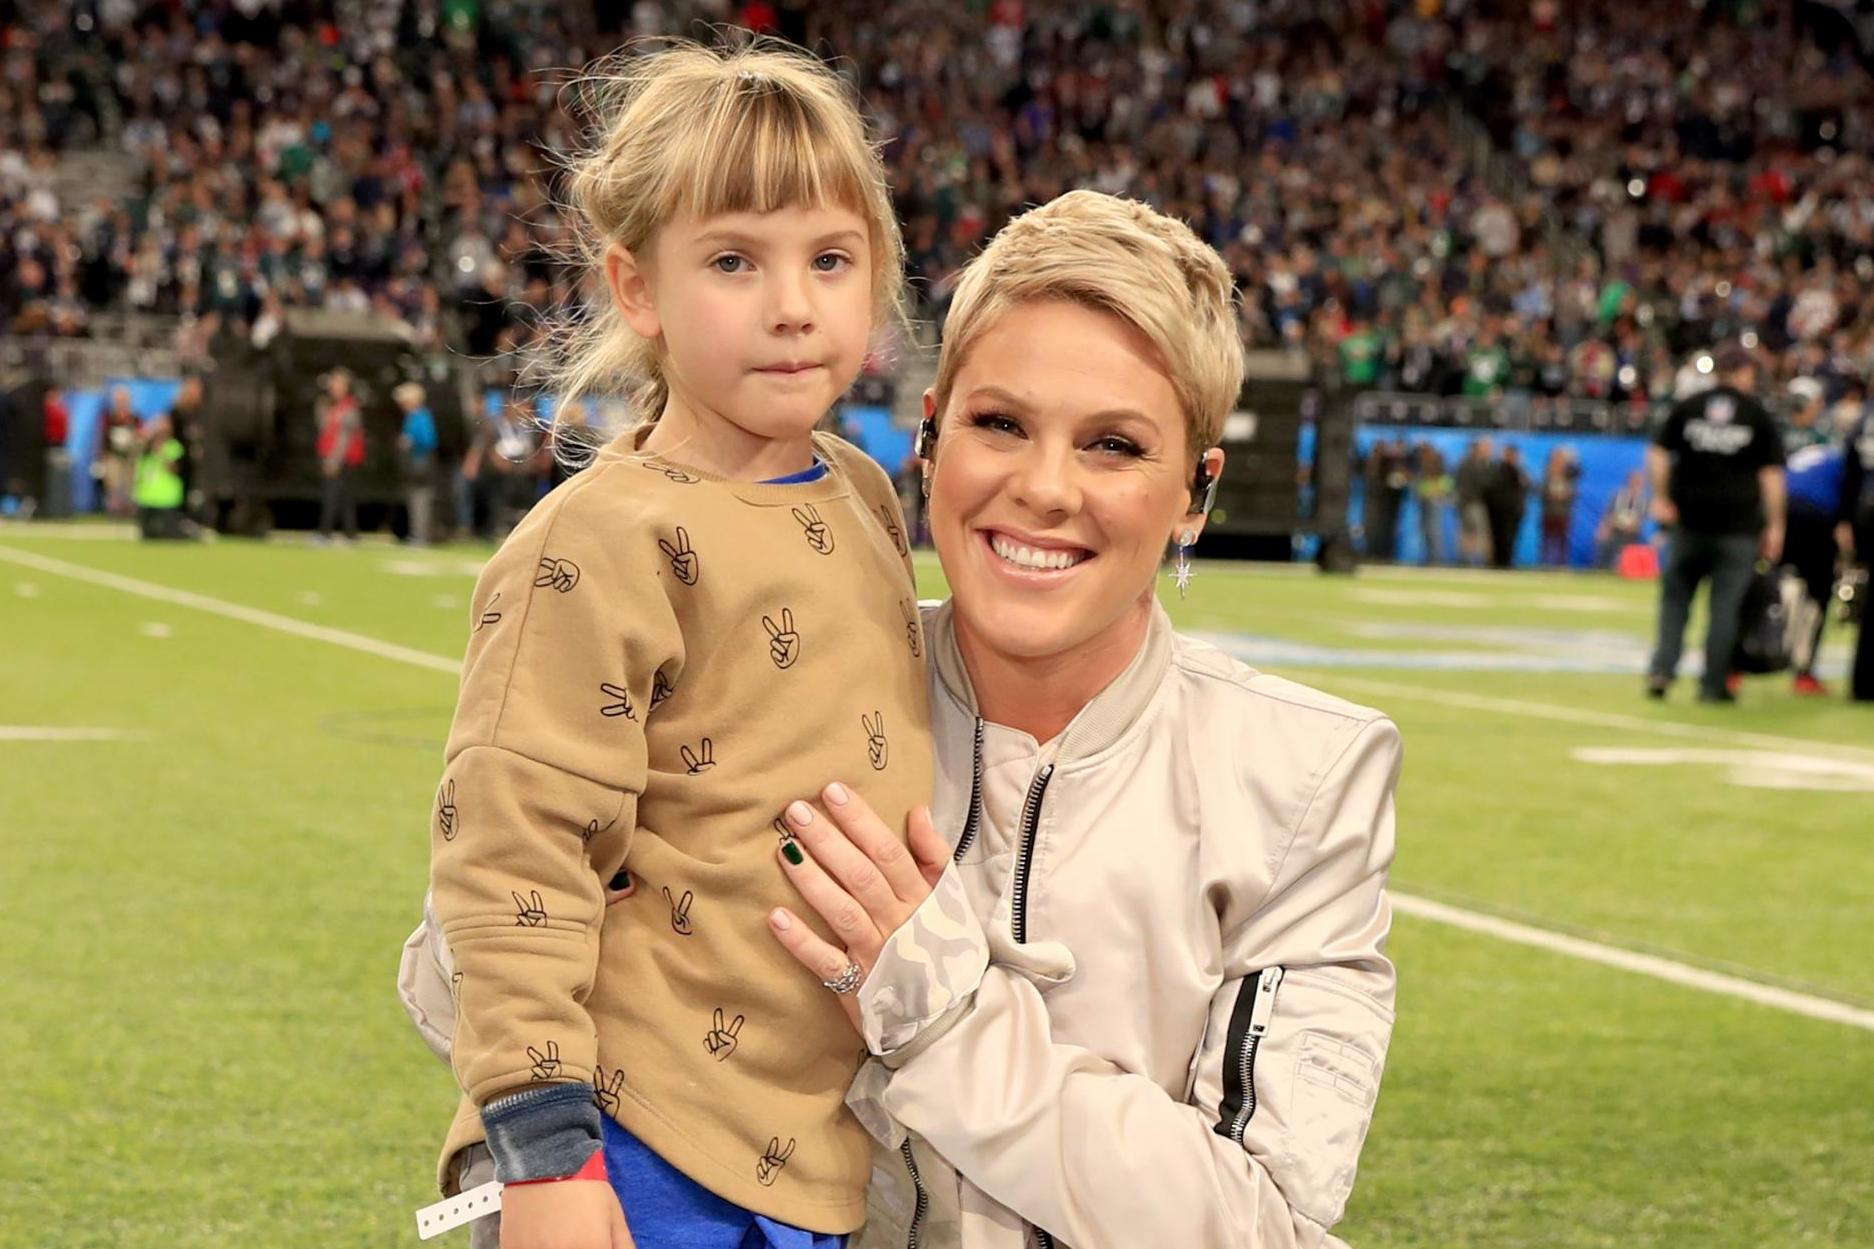 Recording artist Pink (R) poses with daughter Willow Sage Hart before the National Anthem during the Super Bowl LII Pregame show at U.S. Bank Stadium on February 4, 2018 in Minneapolis, Minnesota.